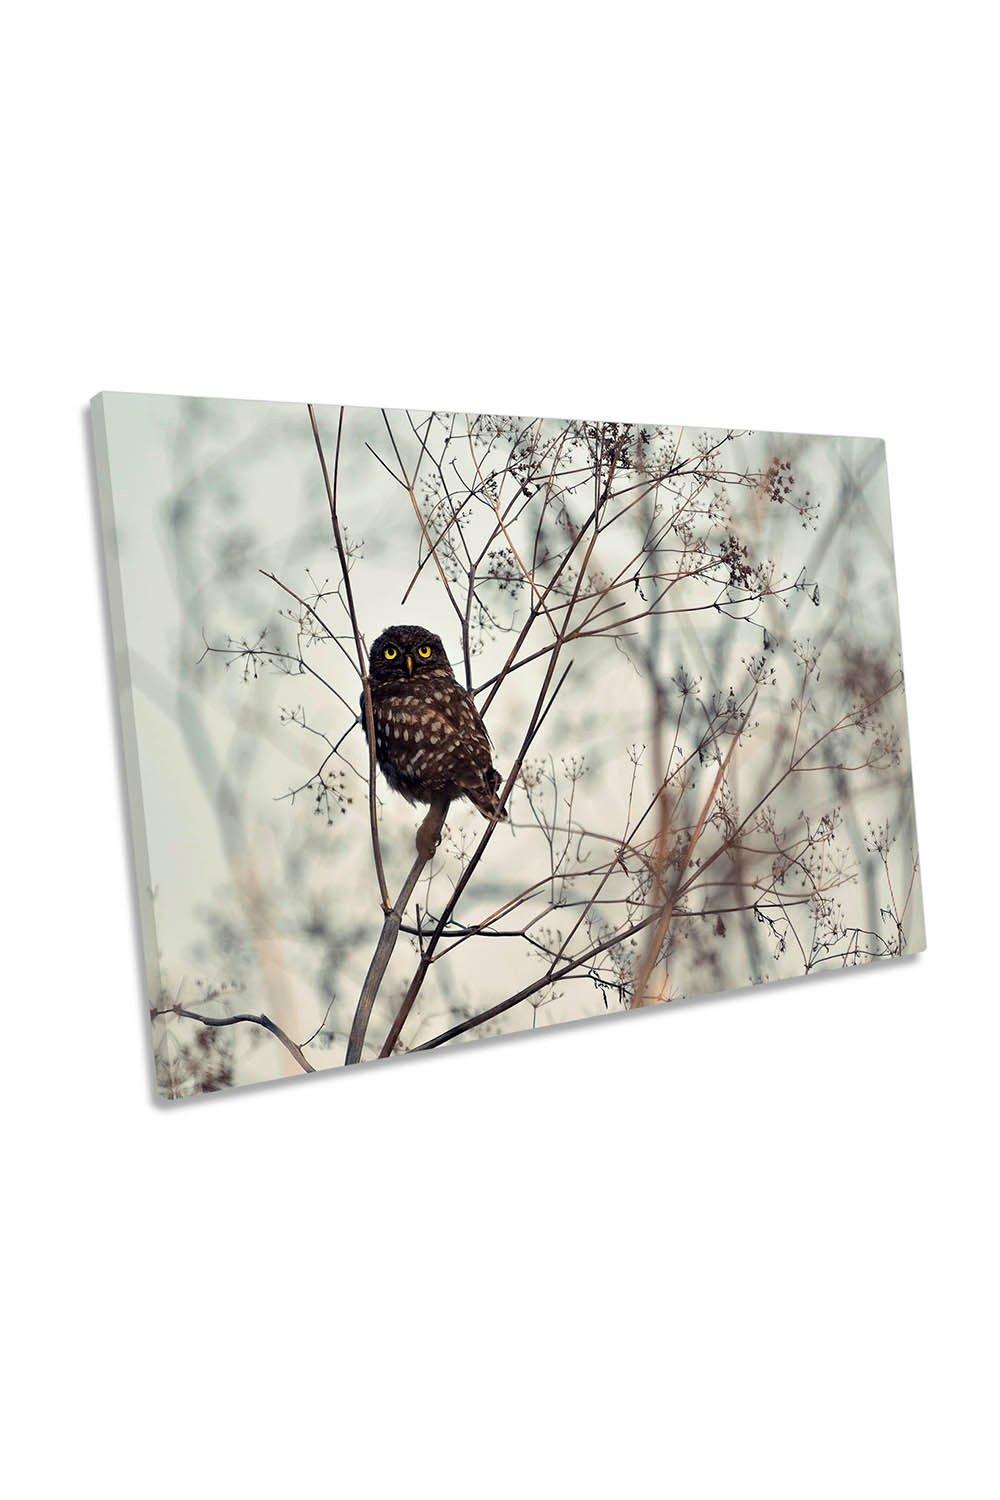 Look at Me Owl Bird Wildlife Canvas Wall Art Picture Print